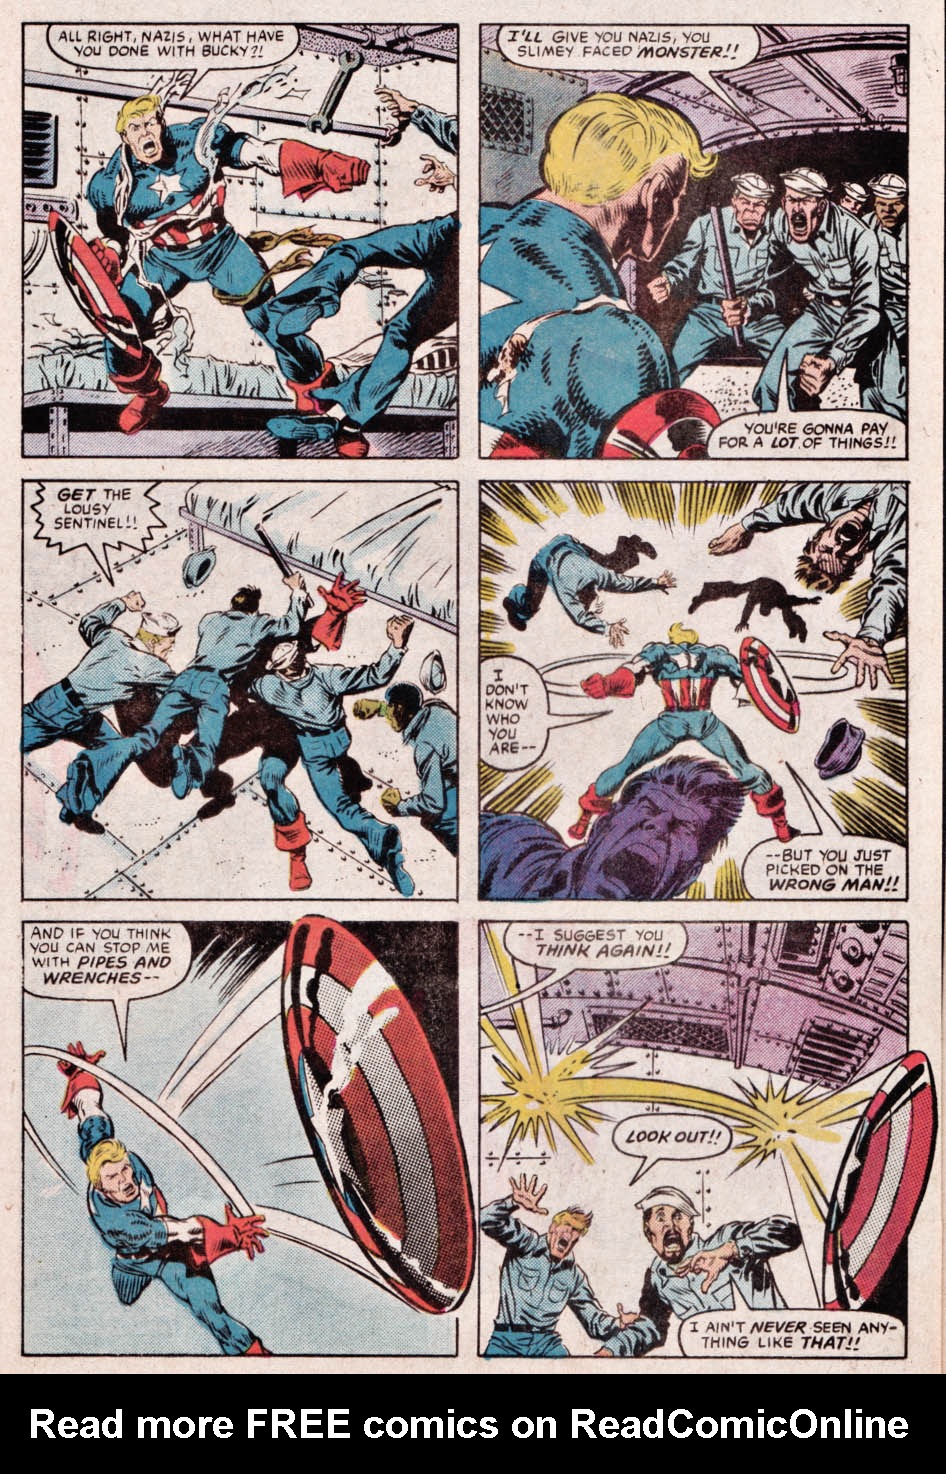 What If? (1977) #44_-_Captain_America_were_revived_today #44 - English 23